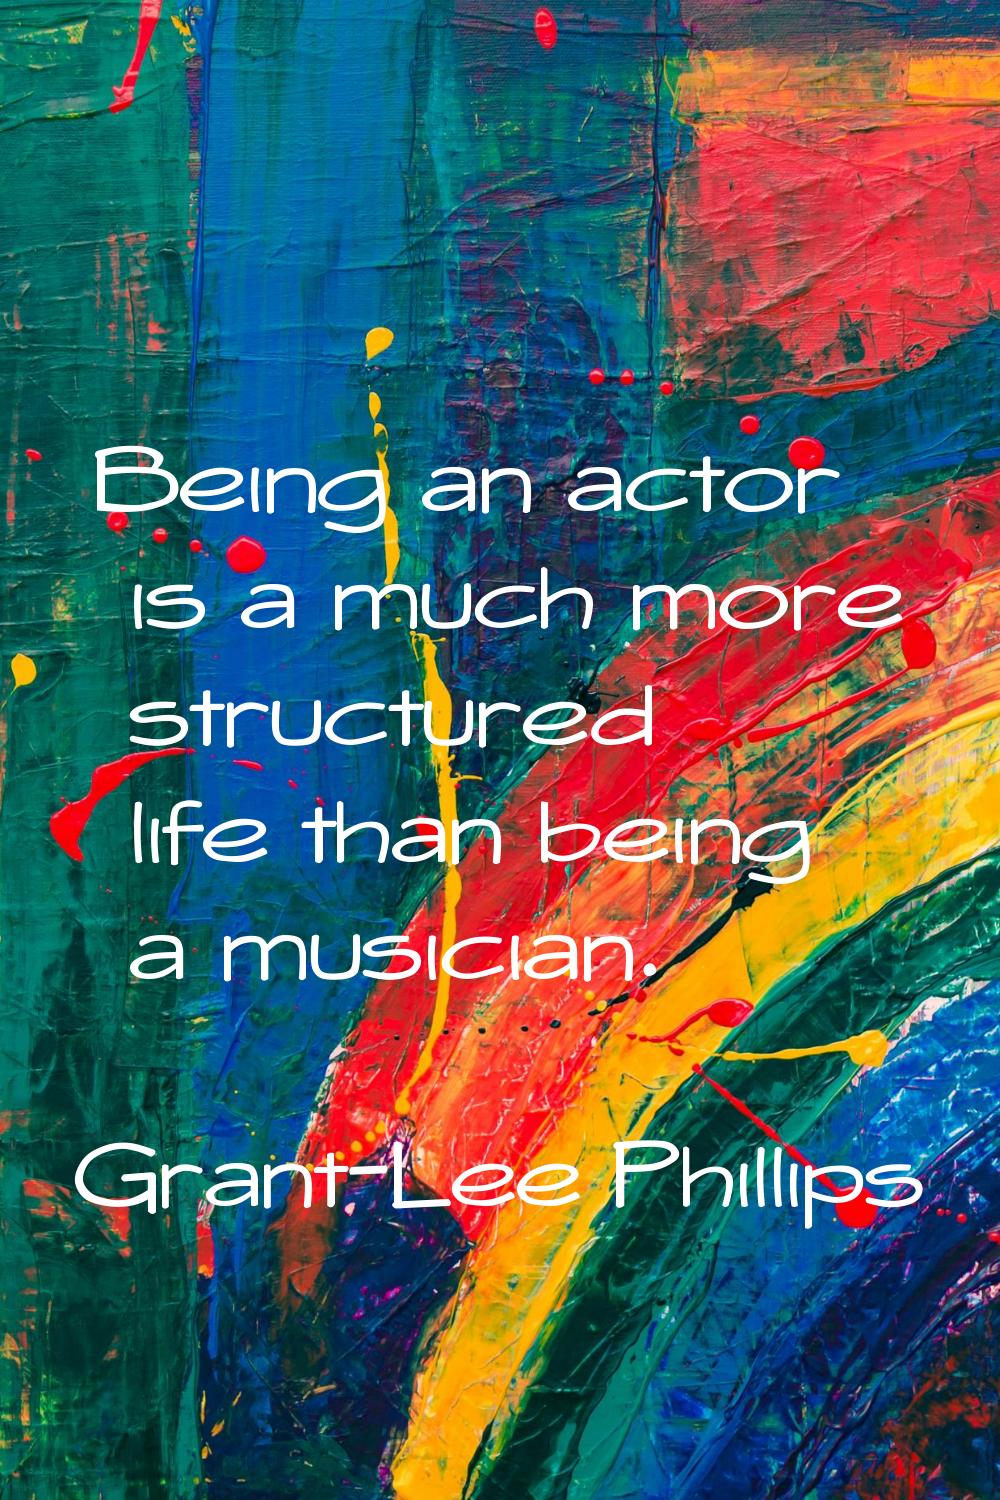 Being an actor is a much more structured life than being a musician.